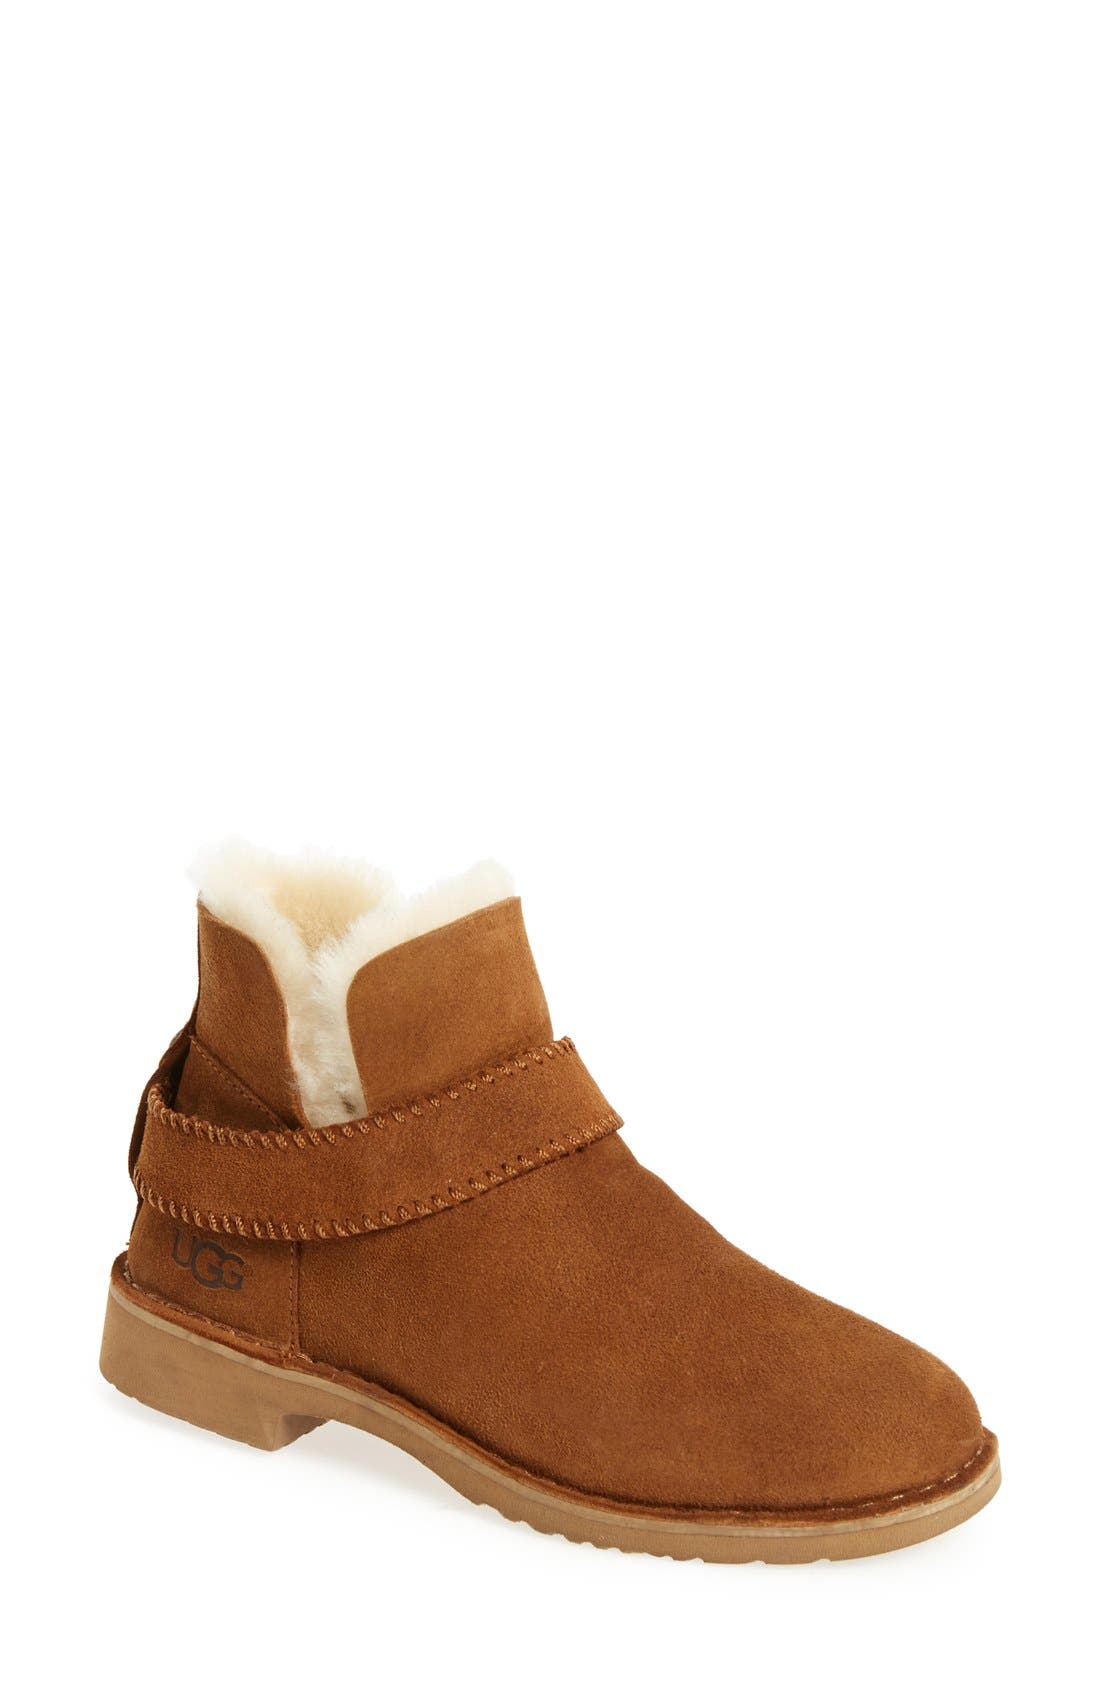 ugg slip on womens shoes